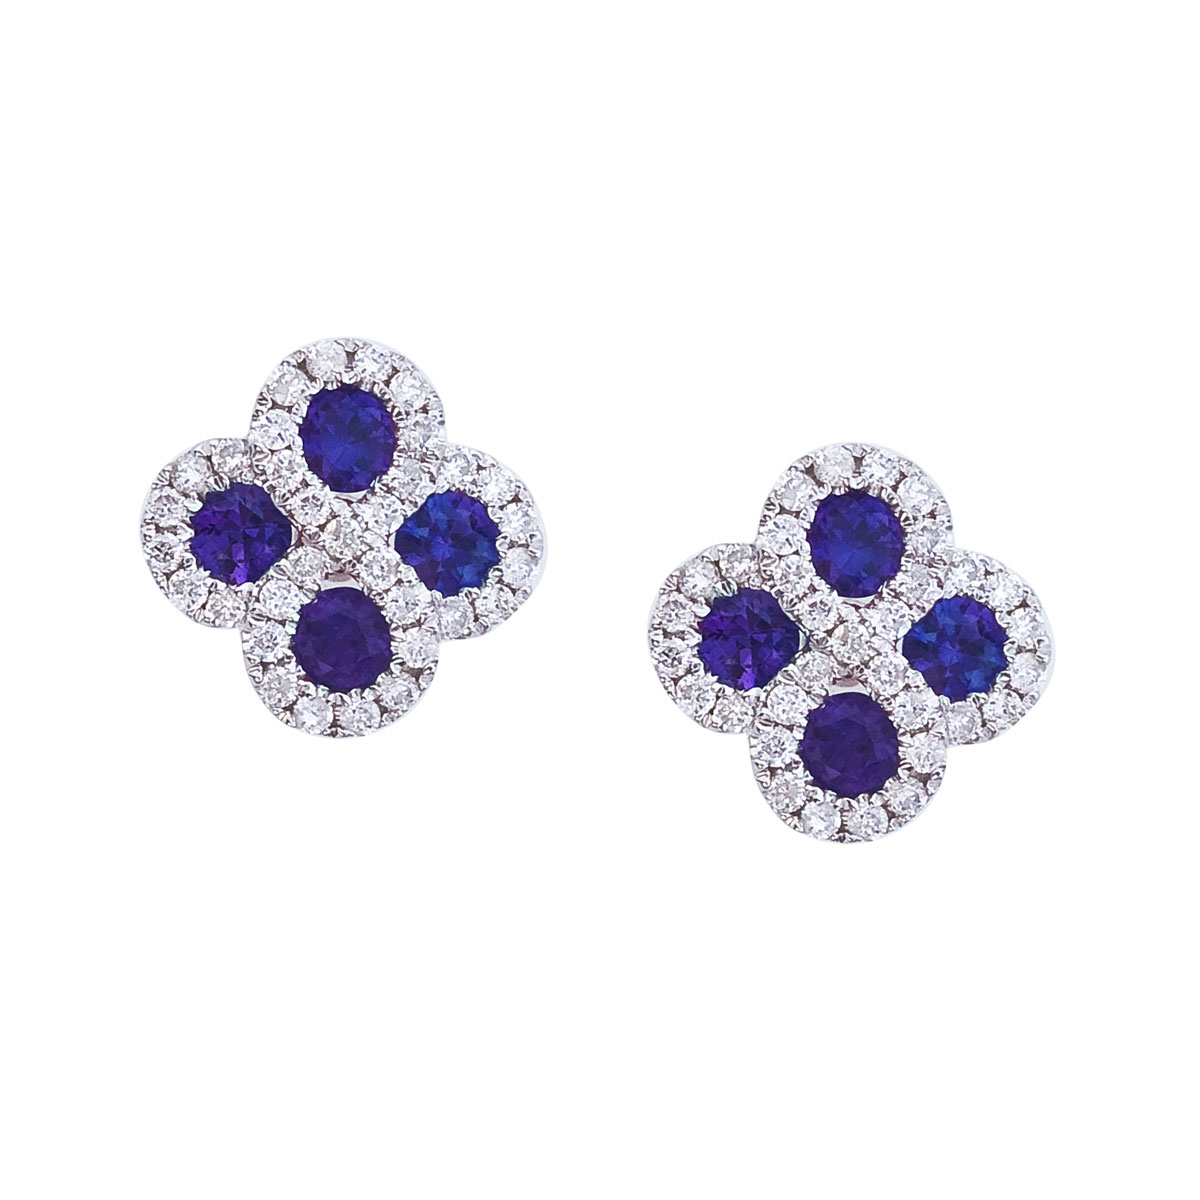 Beautiful clover shaped earrings with 2.7 mm sapphires surrounded by gleaming diamonds.